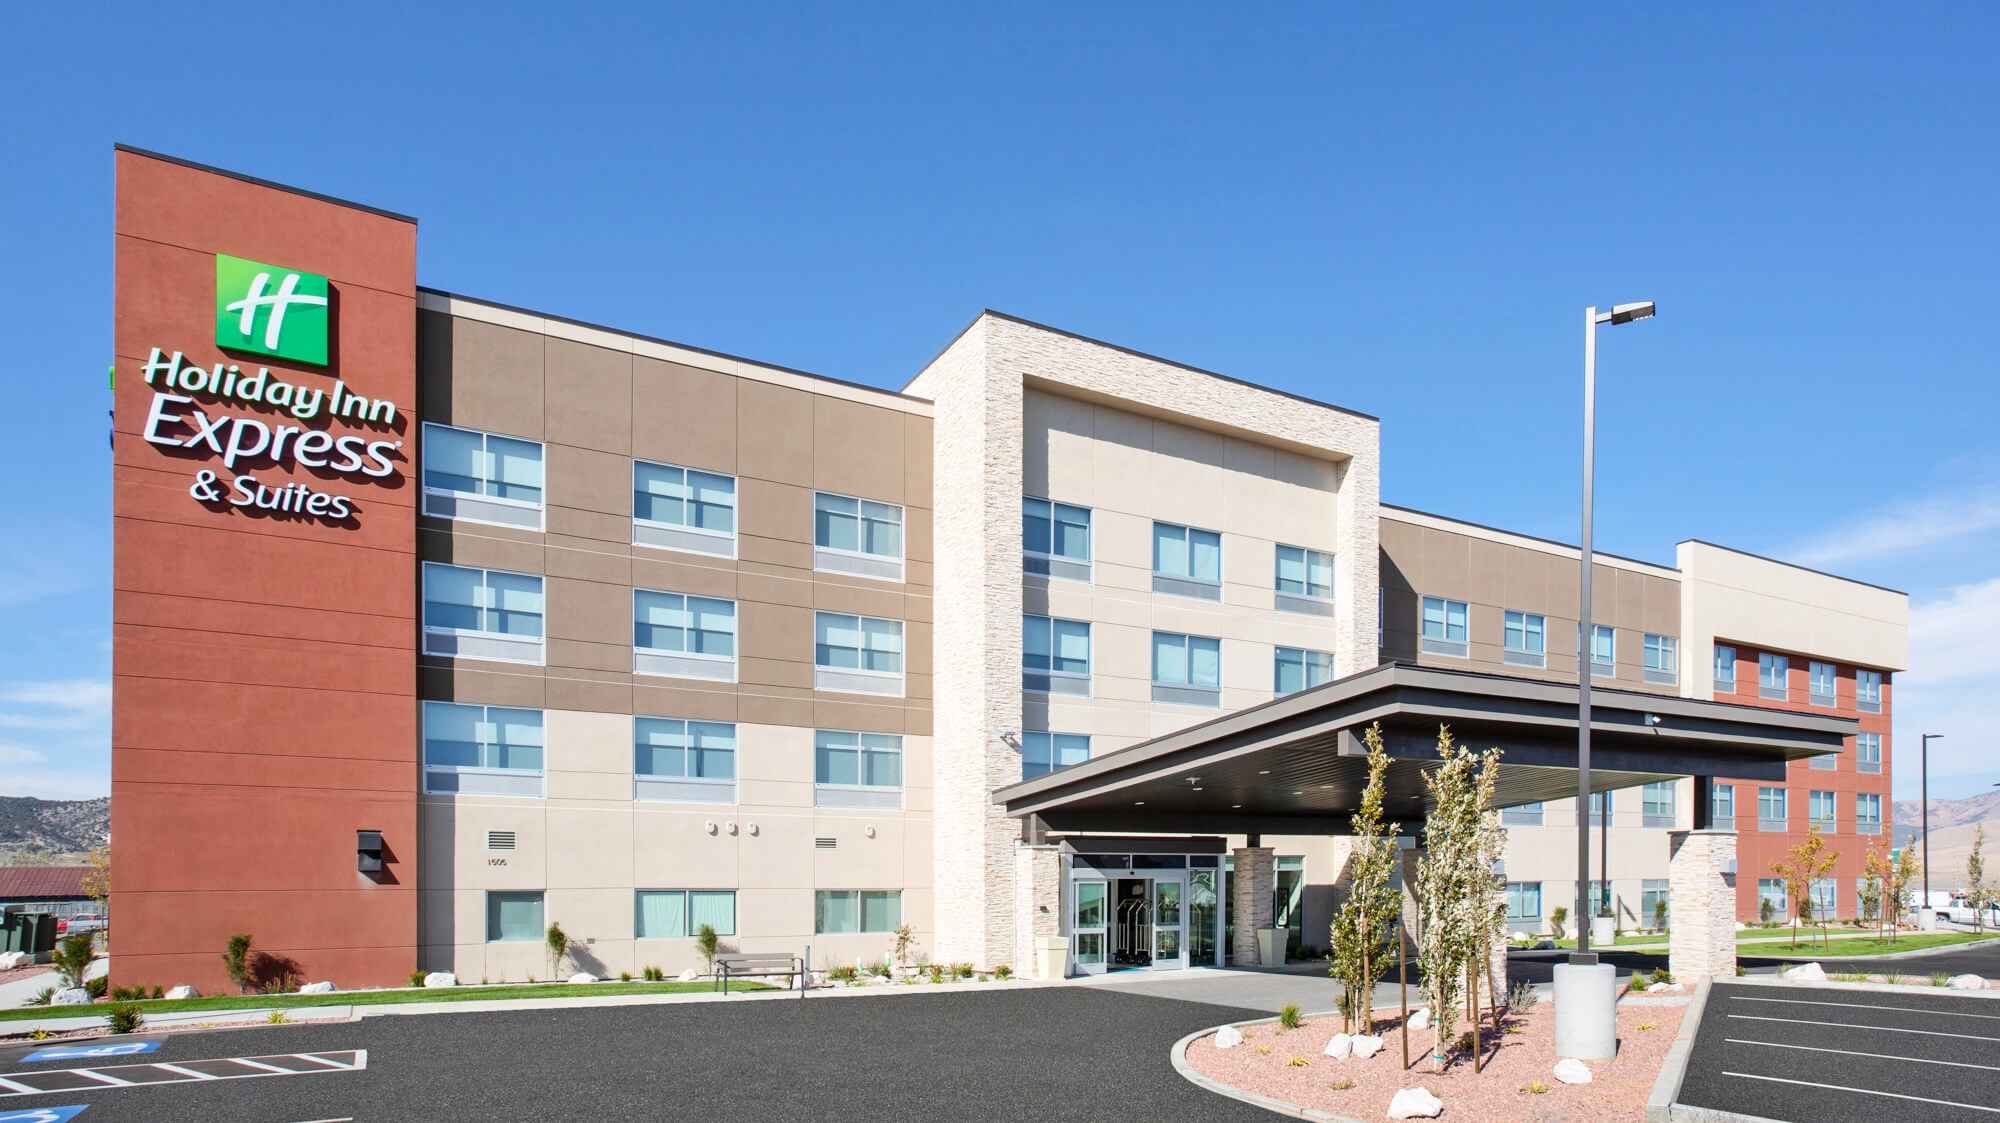 Holiday Inn Express & Suites—Ely